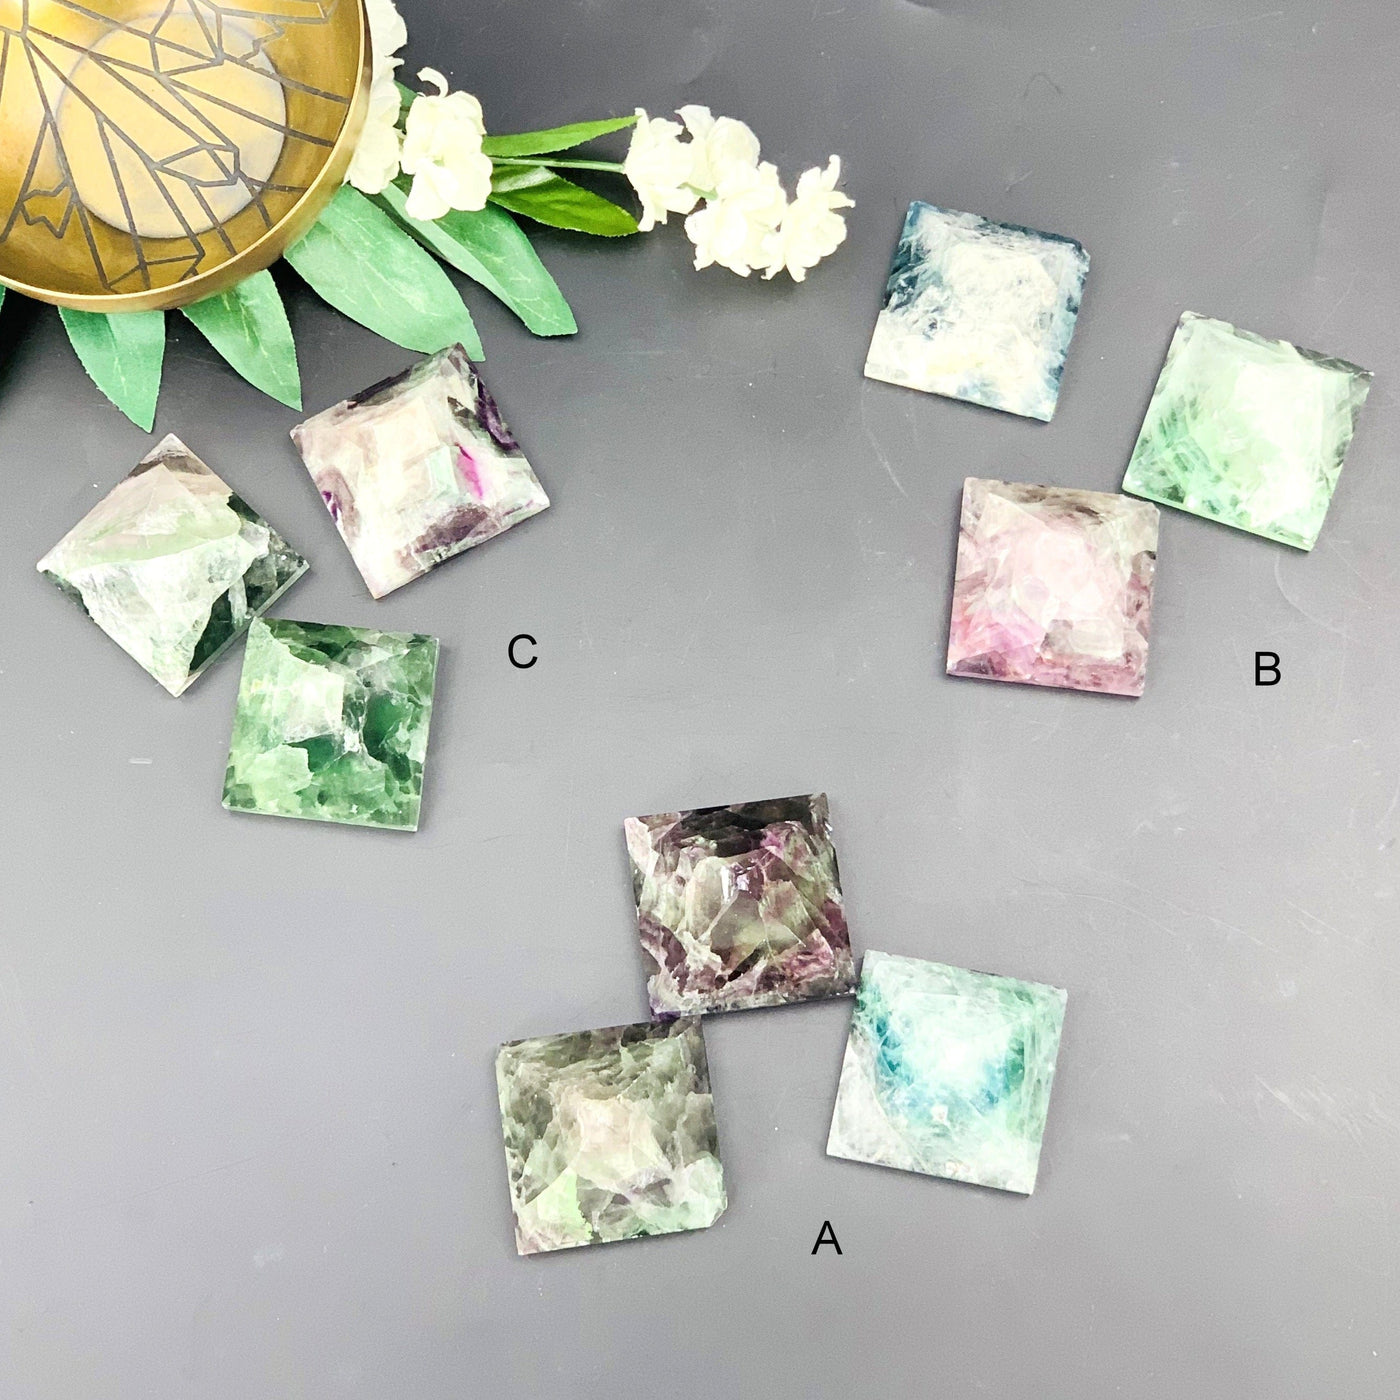 Top angle shot of the 3 sets of Small Fluorite Pyramid